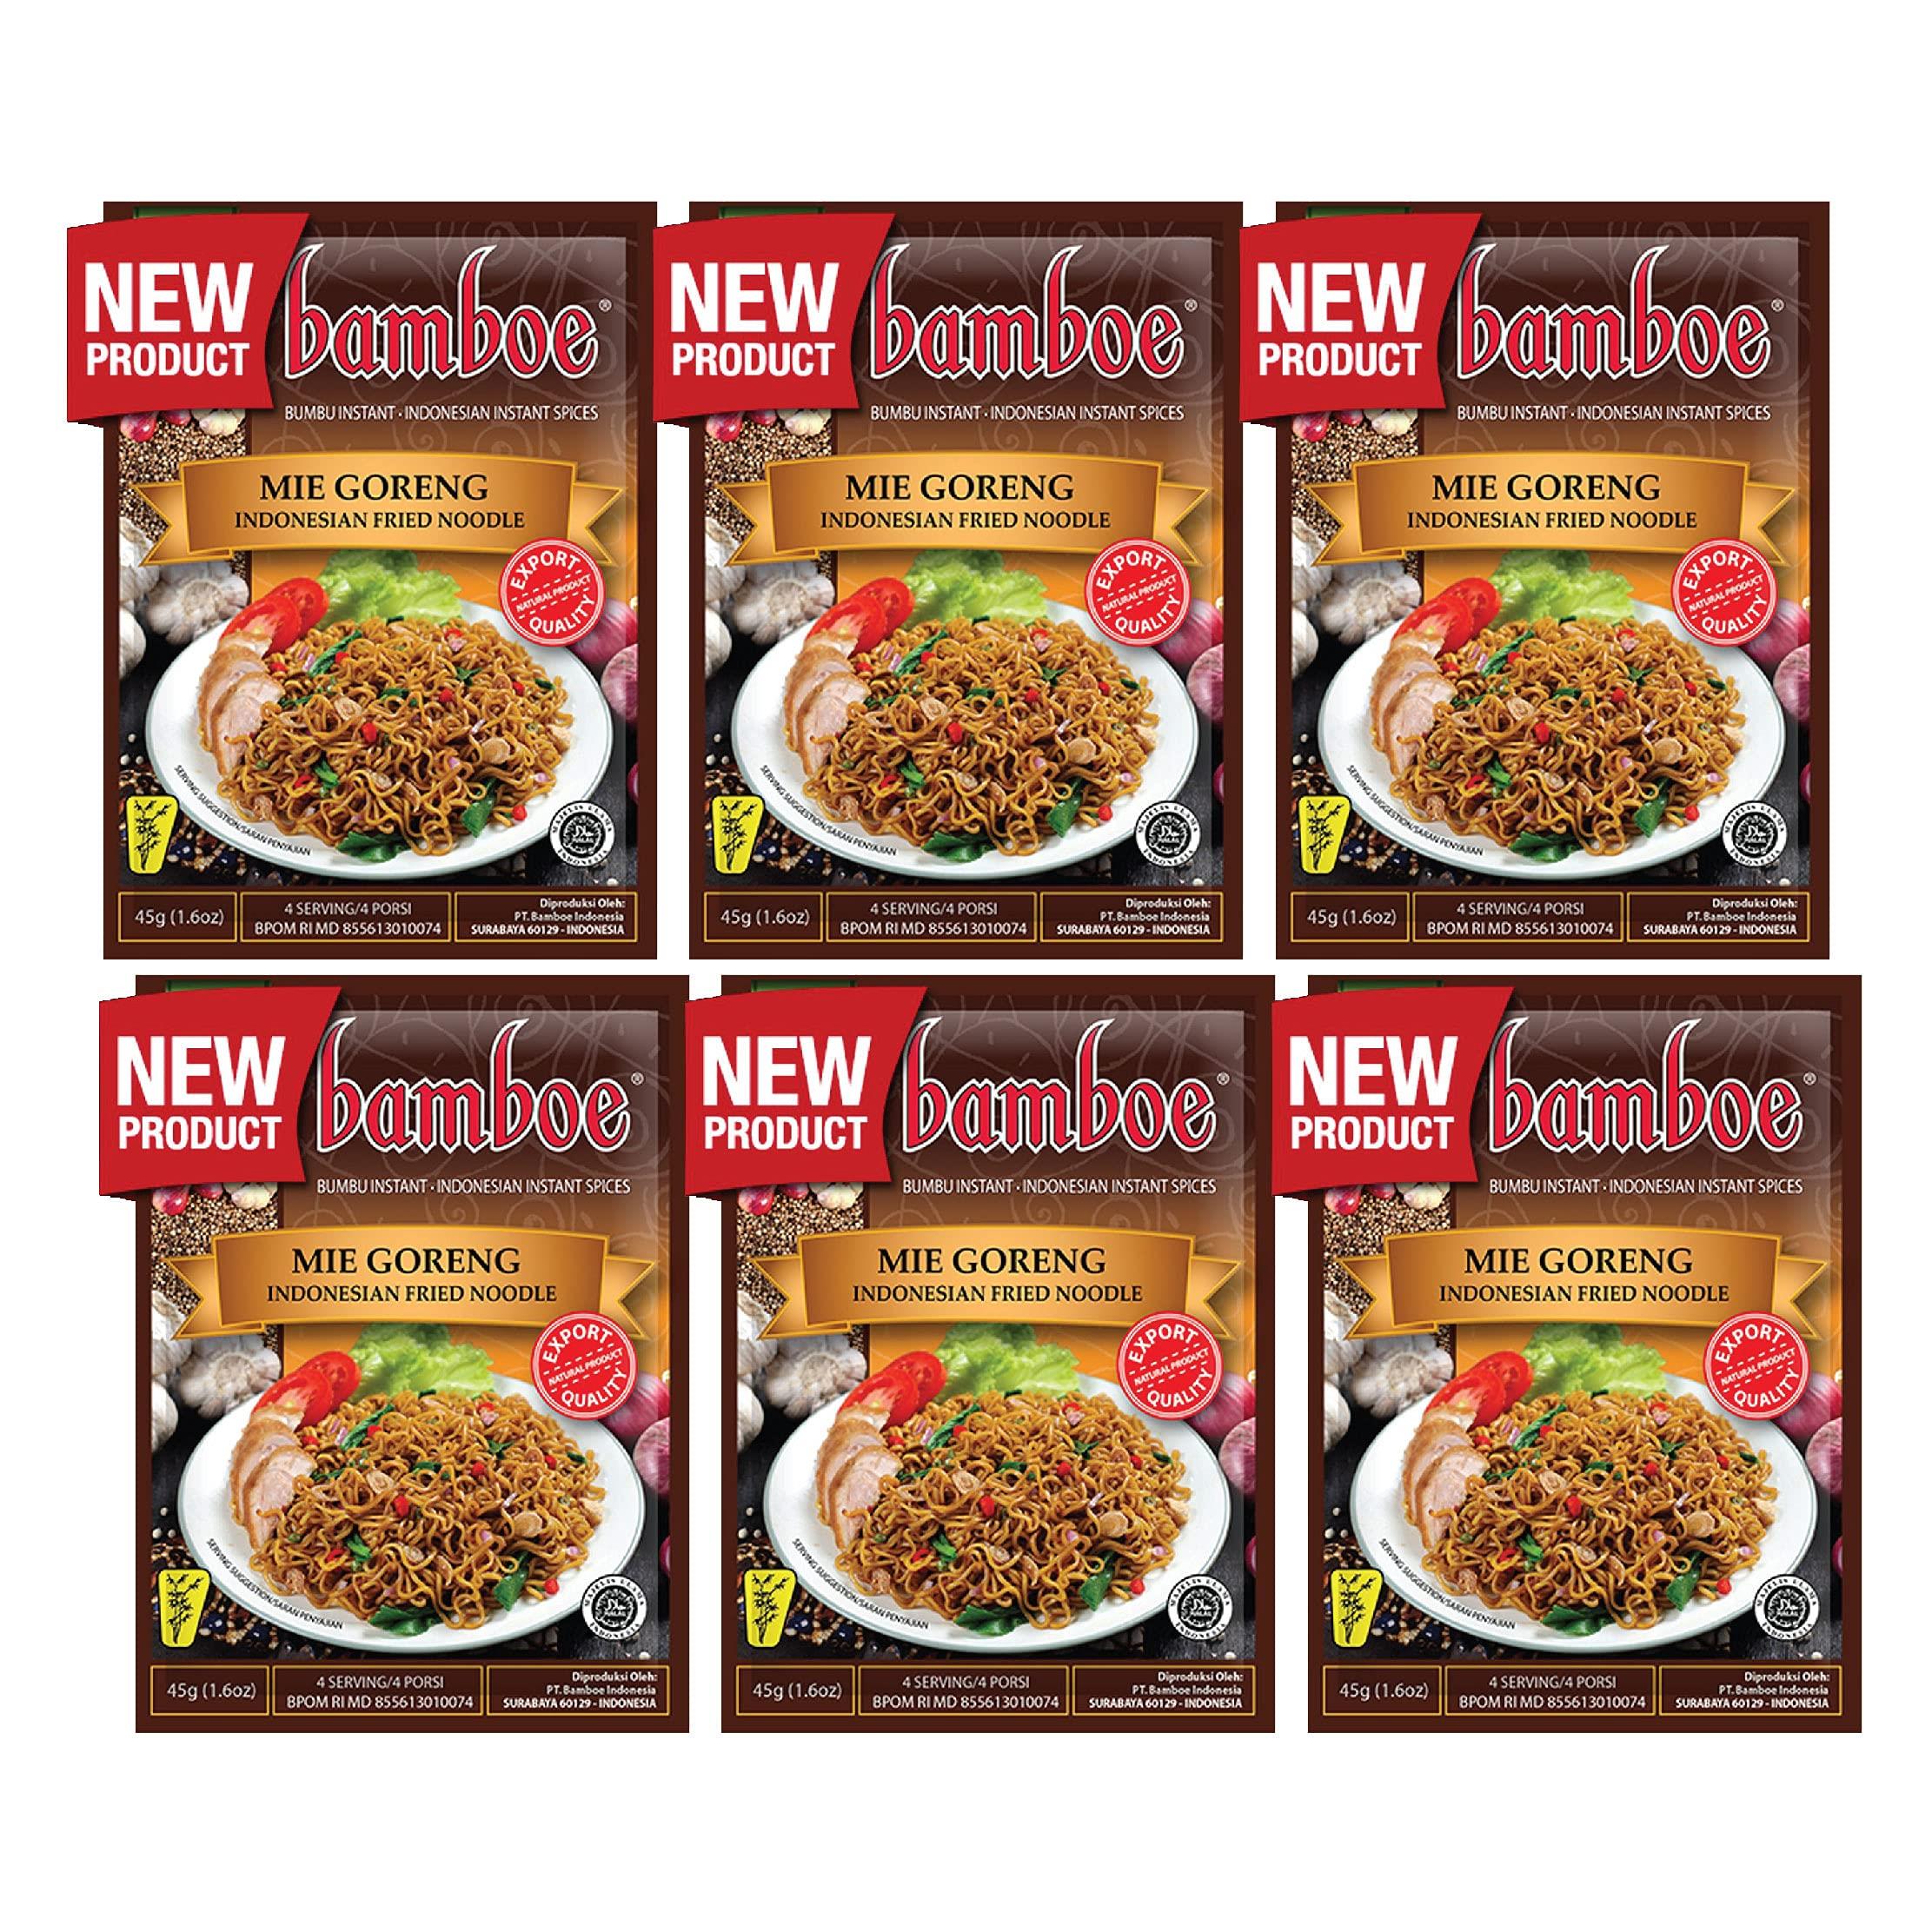 Bamboe - Mie Goreng/Indonesian Fried Noodle - 6 x 1.6 oz